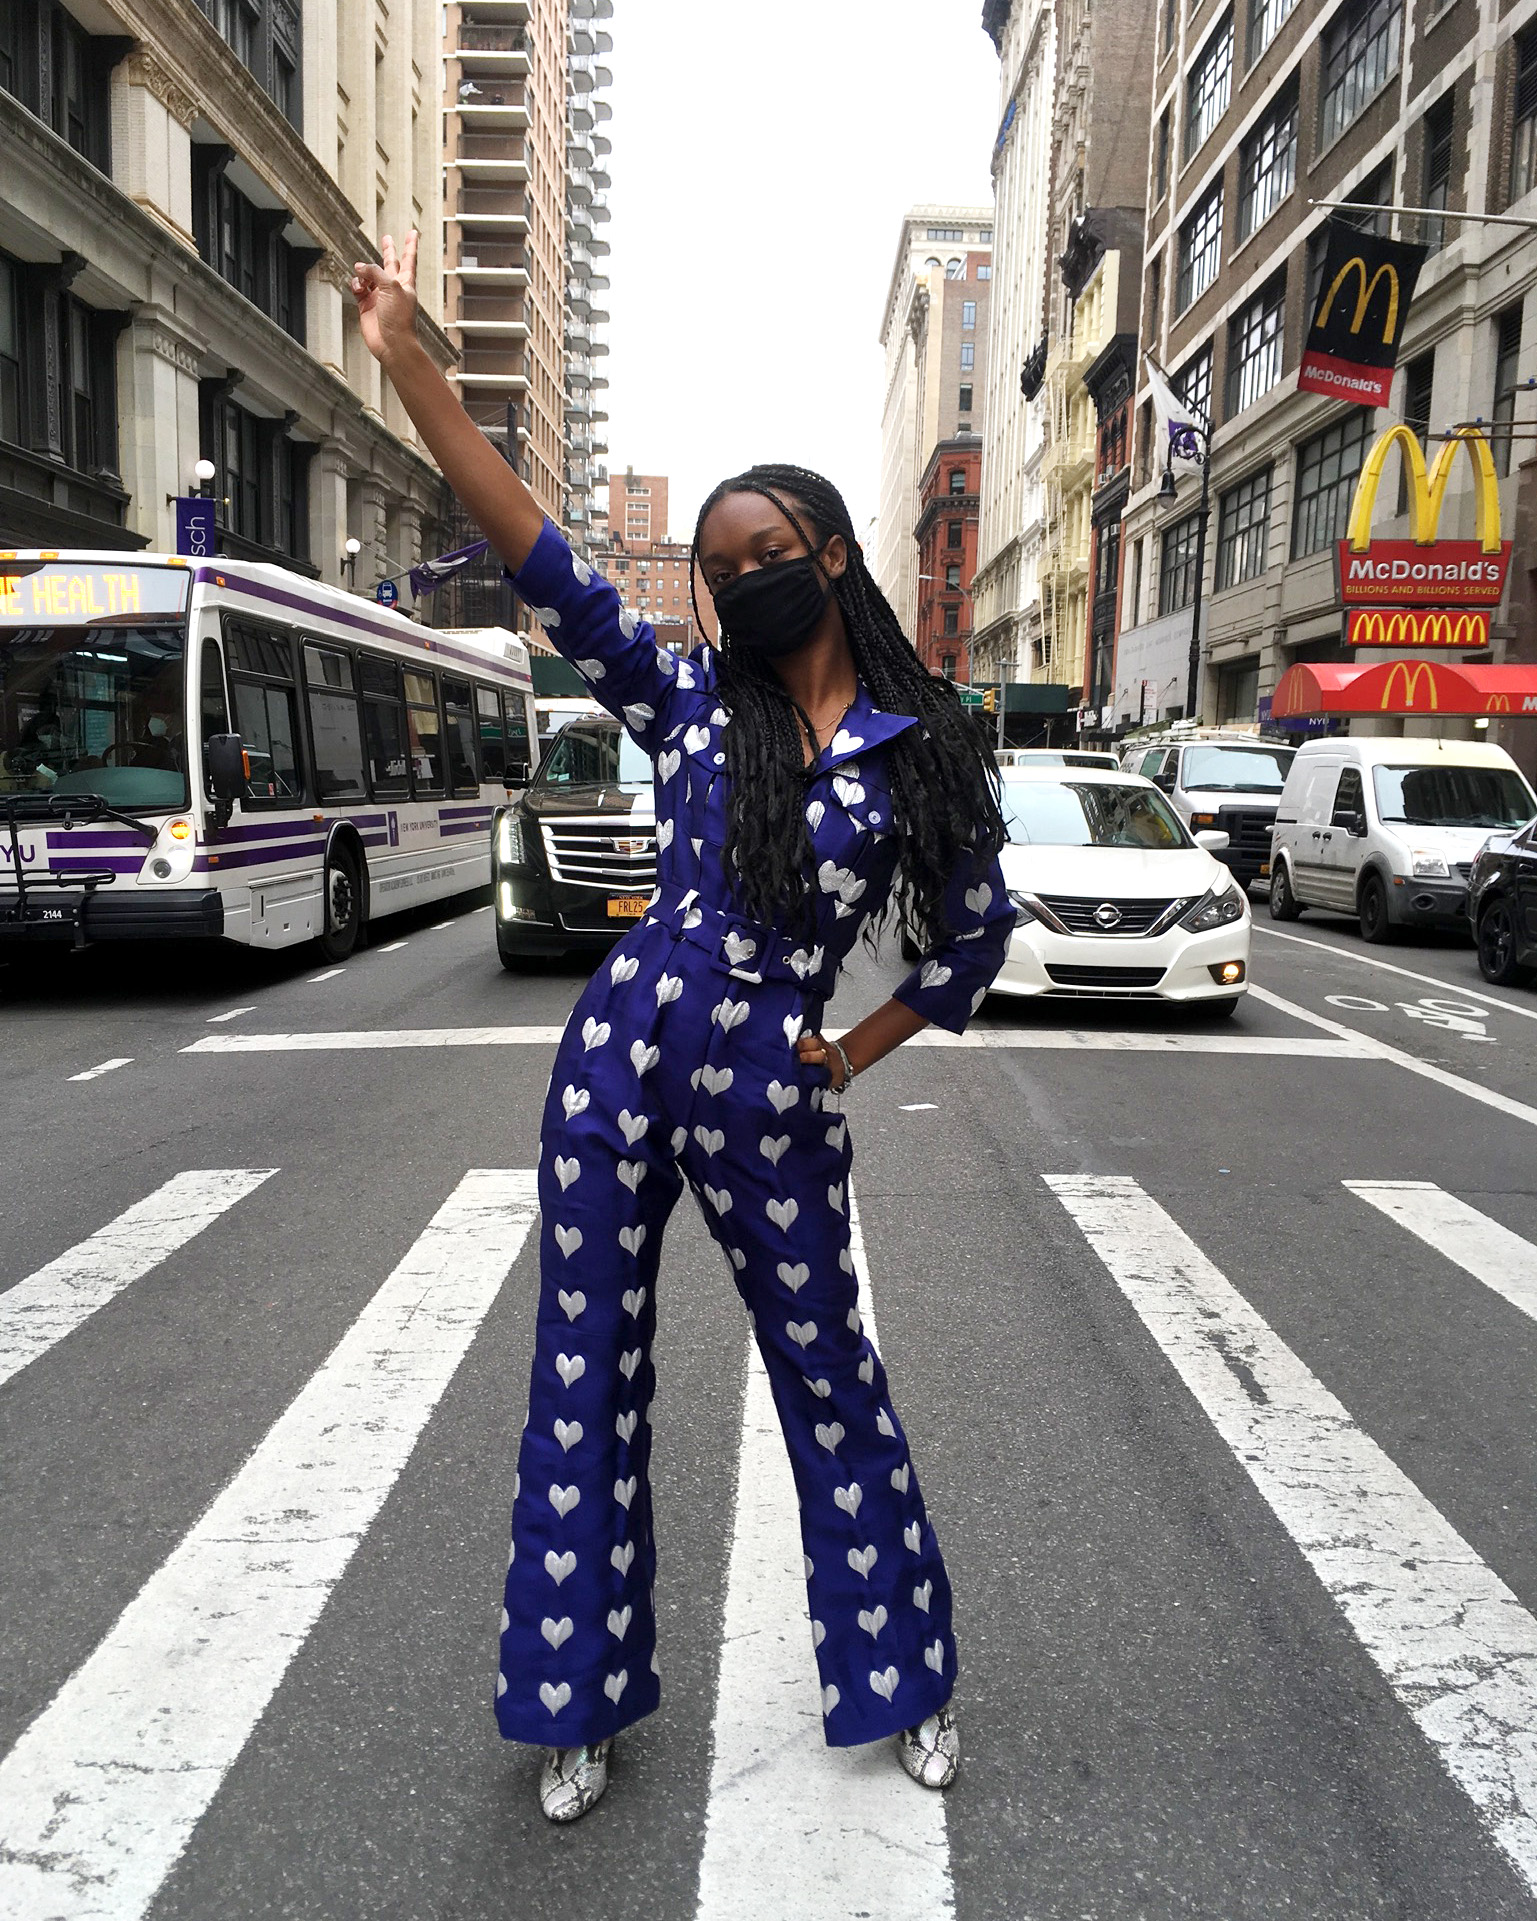 Person posed in middle of sidewalk in front of traffic on New York City street wearing navy blue jumpsuit with silver star embroidery and gray snake print boots